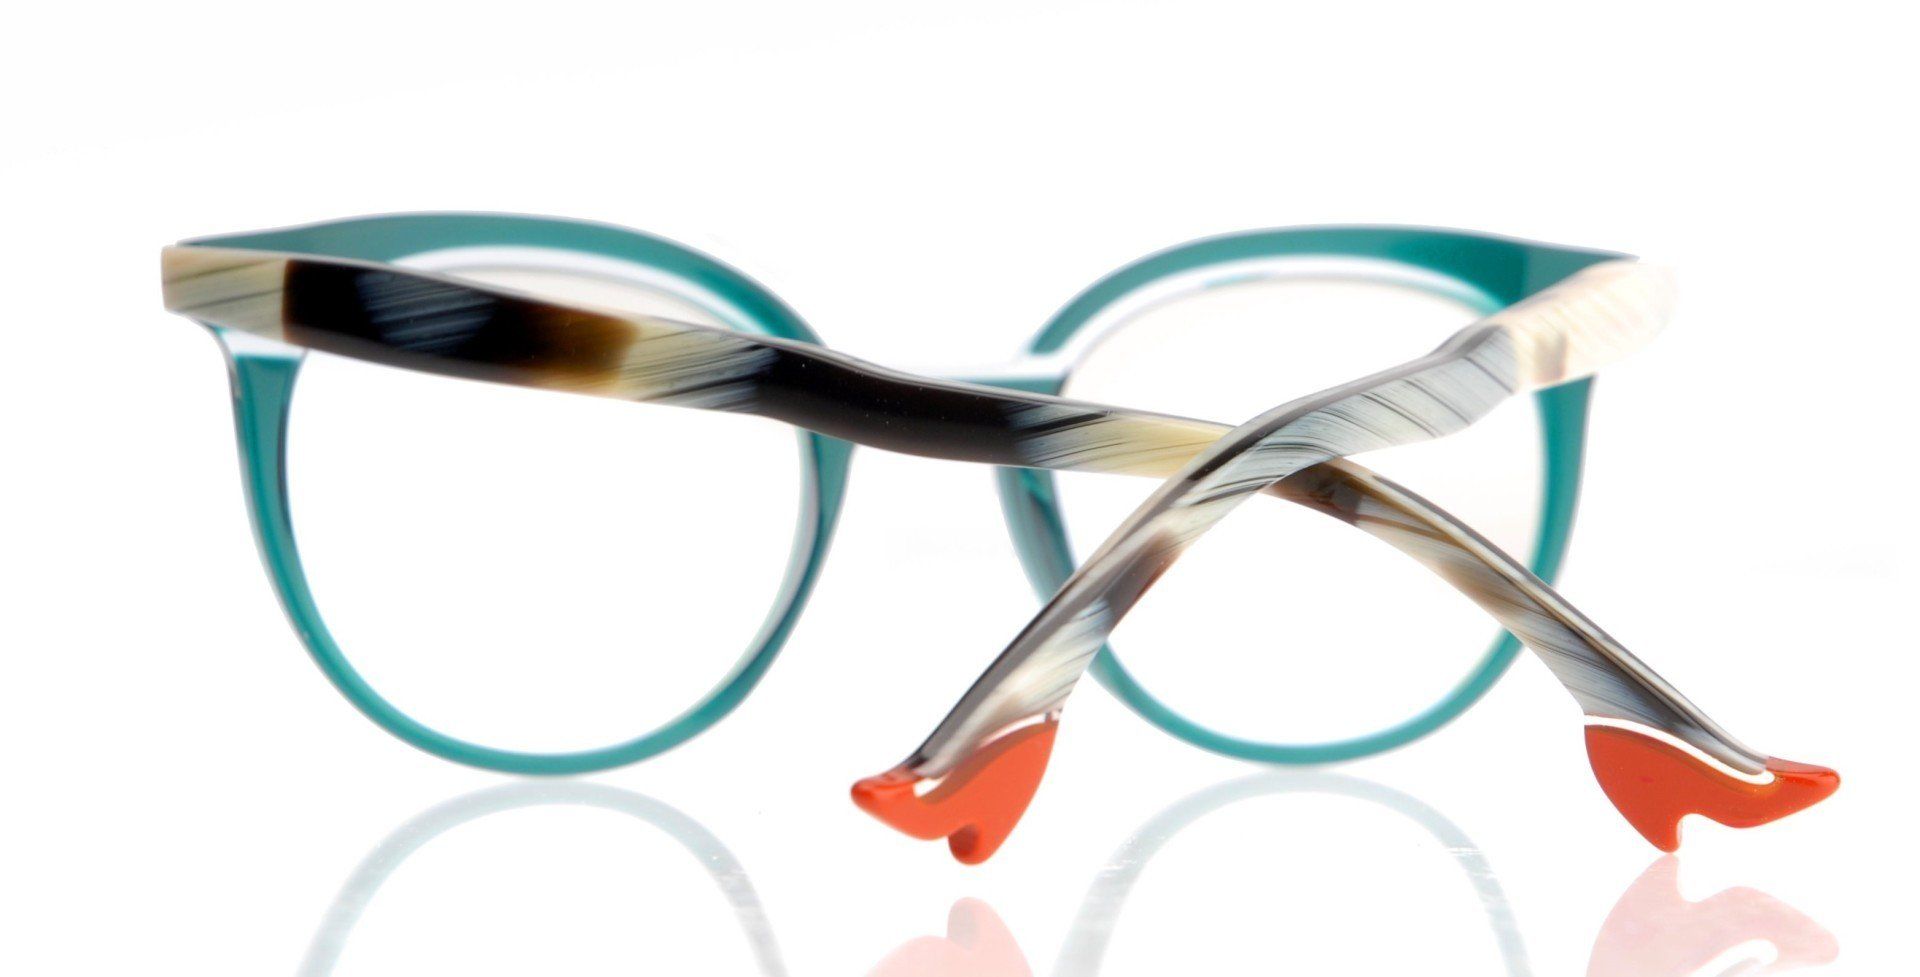 Bocca, teal spectacle frame by Face a Face. Face a Face frames available at Eyewear Creations opticians.